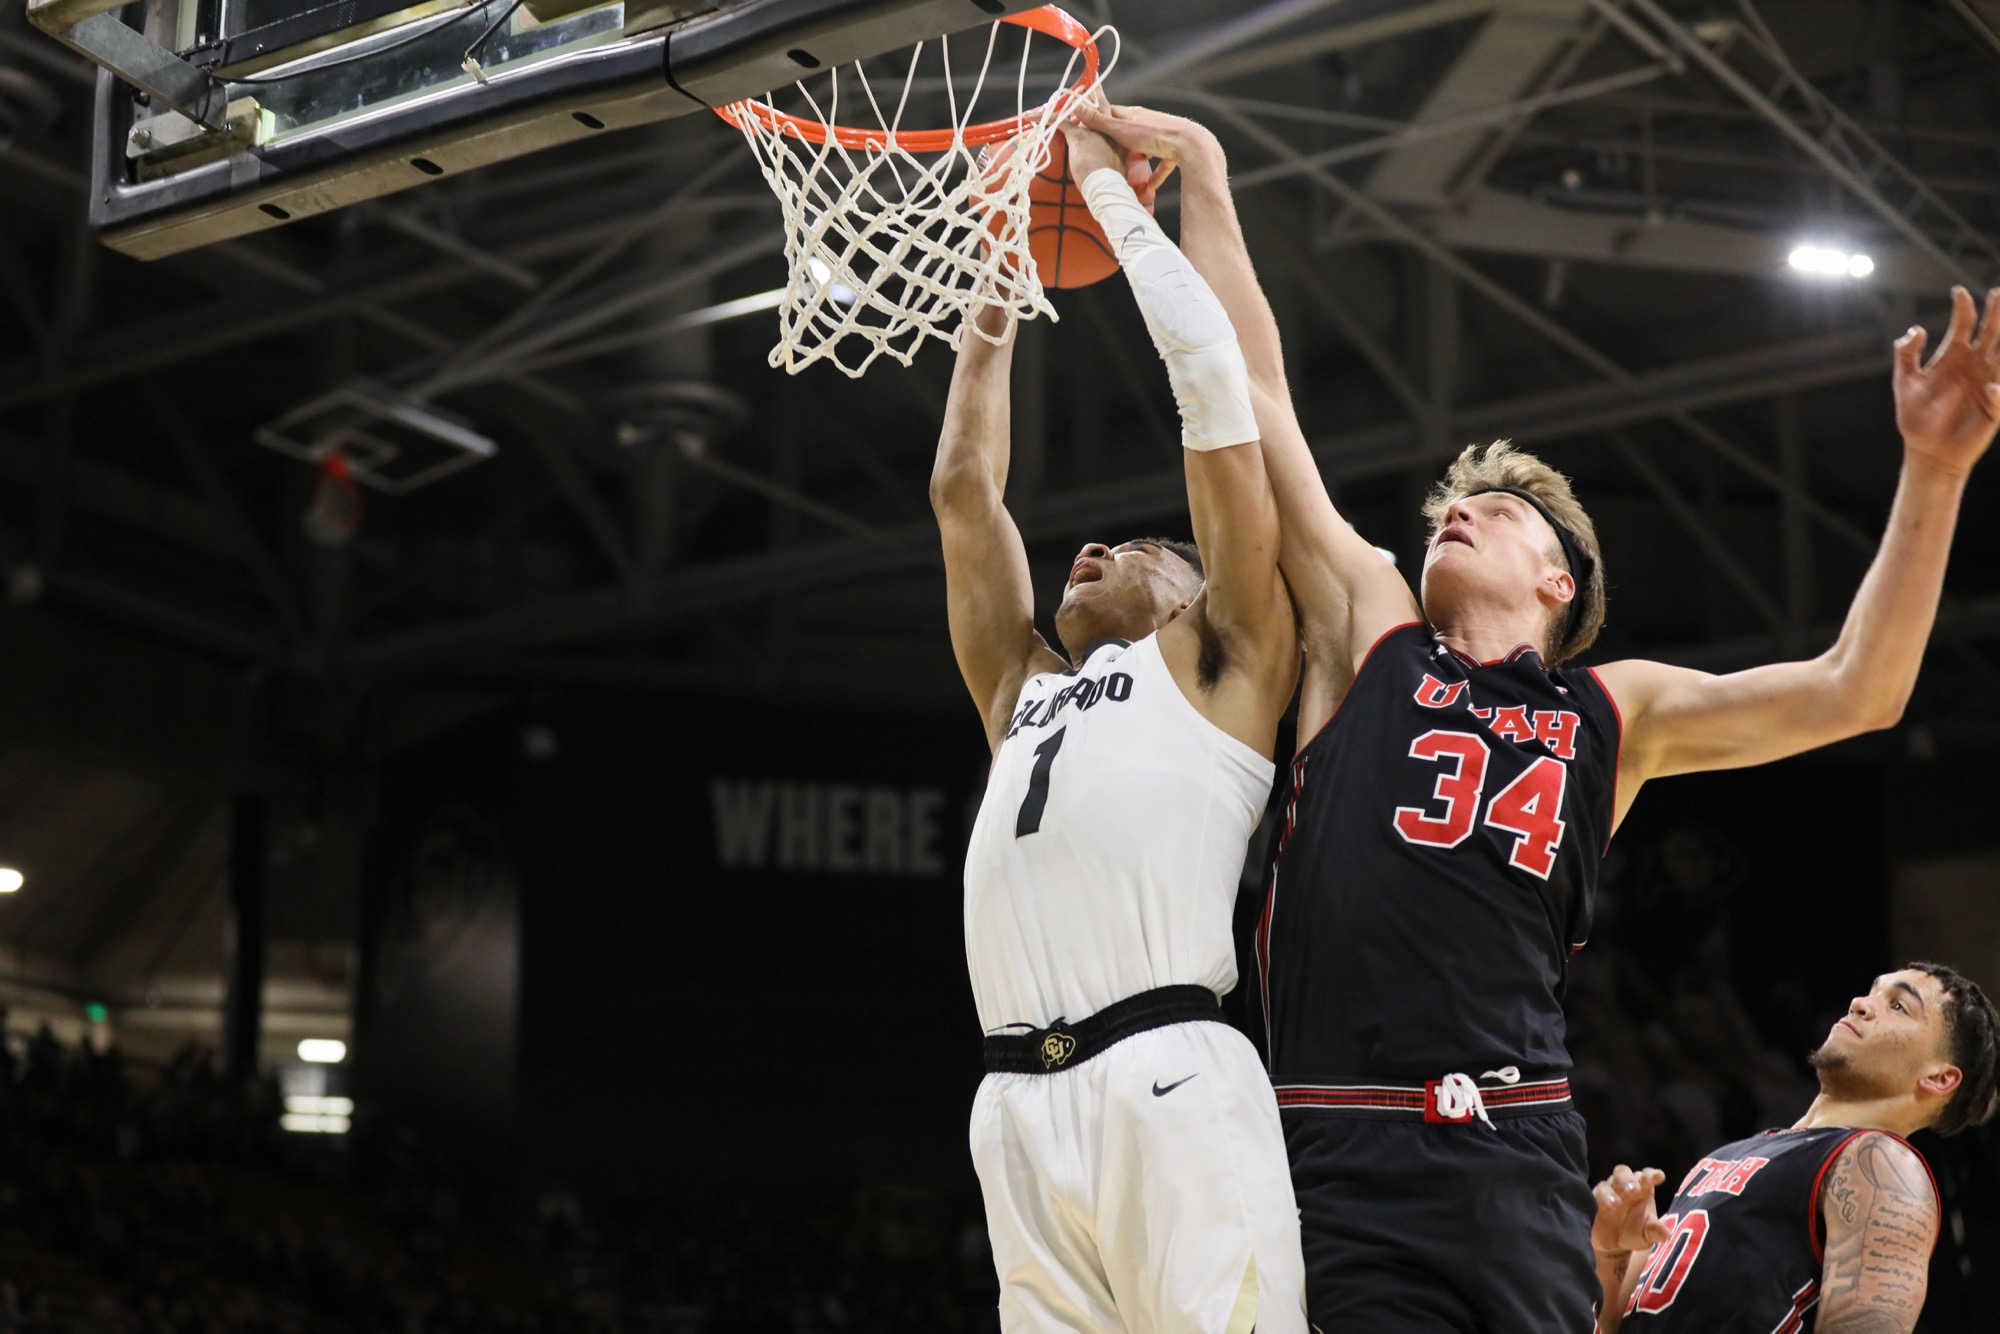 Buffs beat Utes, 71-63, to open three-game homestand